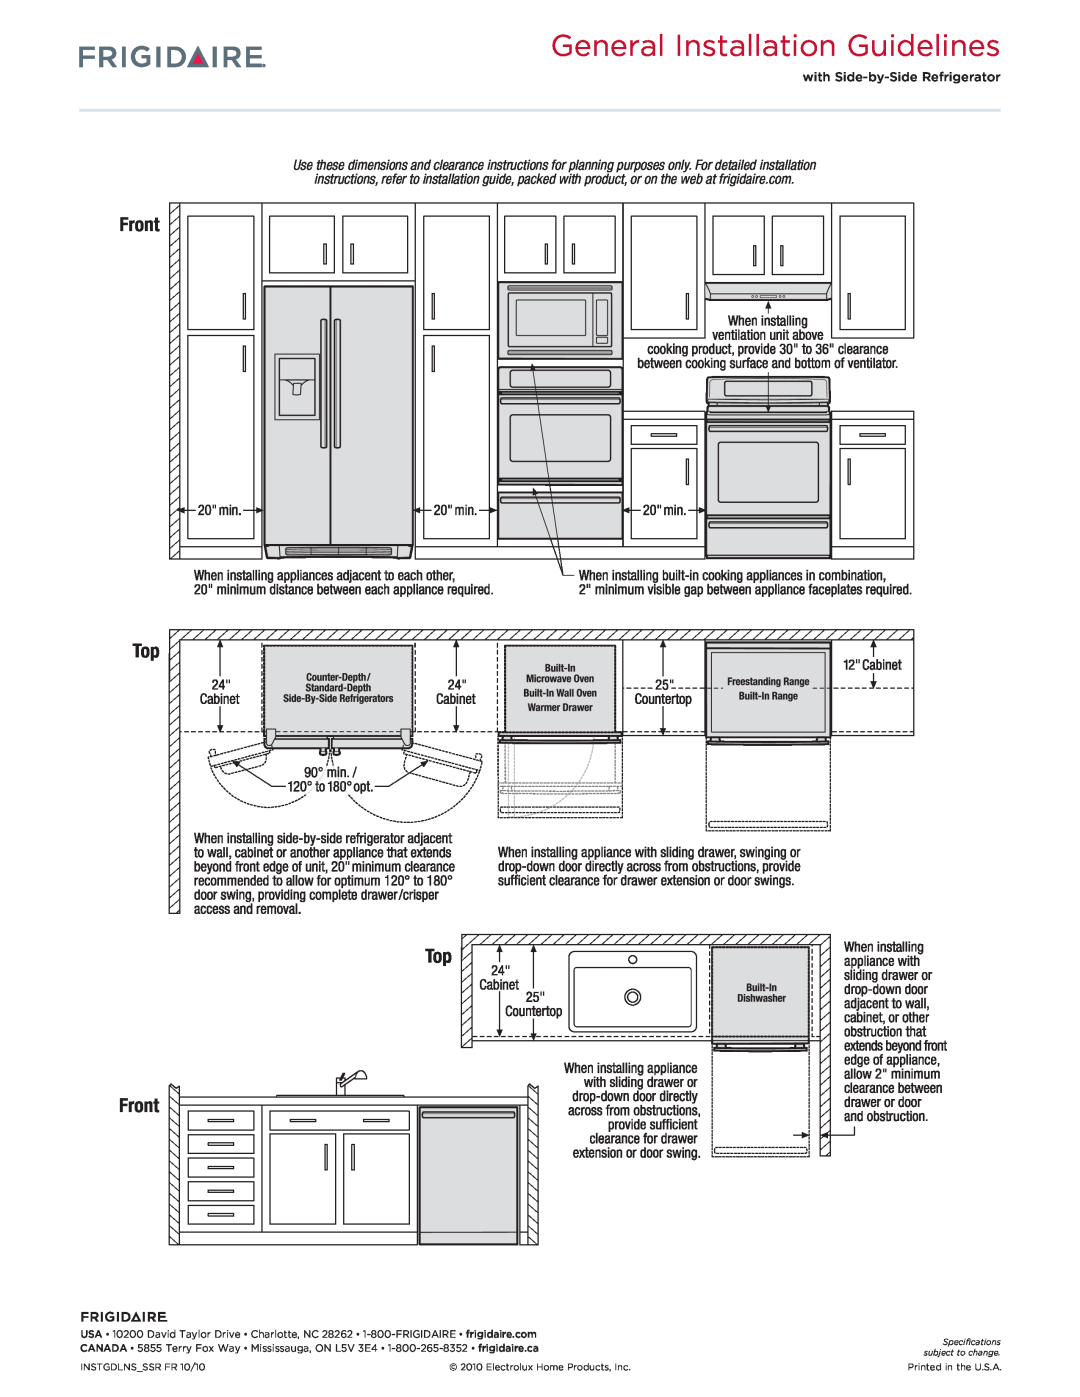 Frigidaire FPGF3081K F dimensions General Installation Guidelines, Top Front 